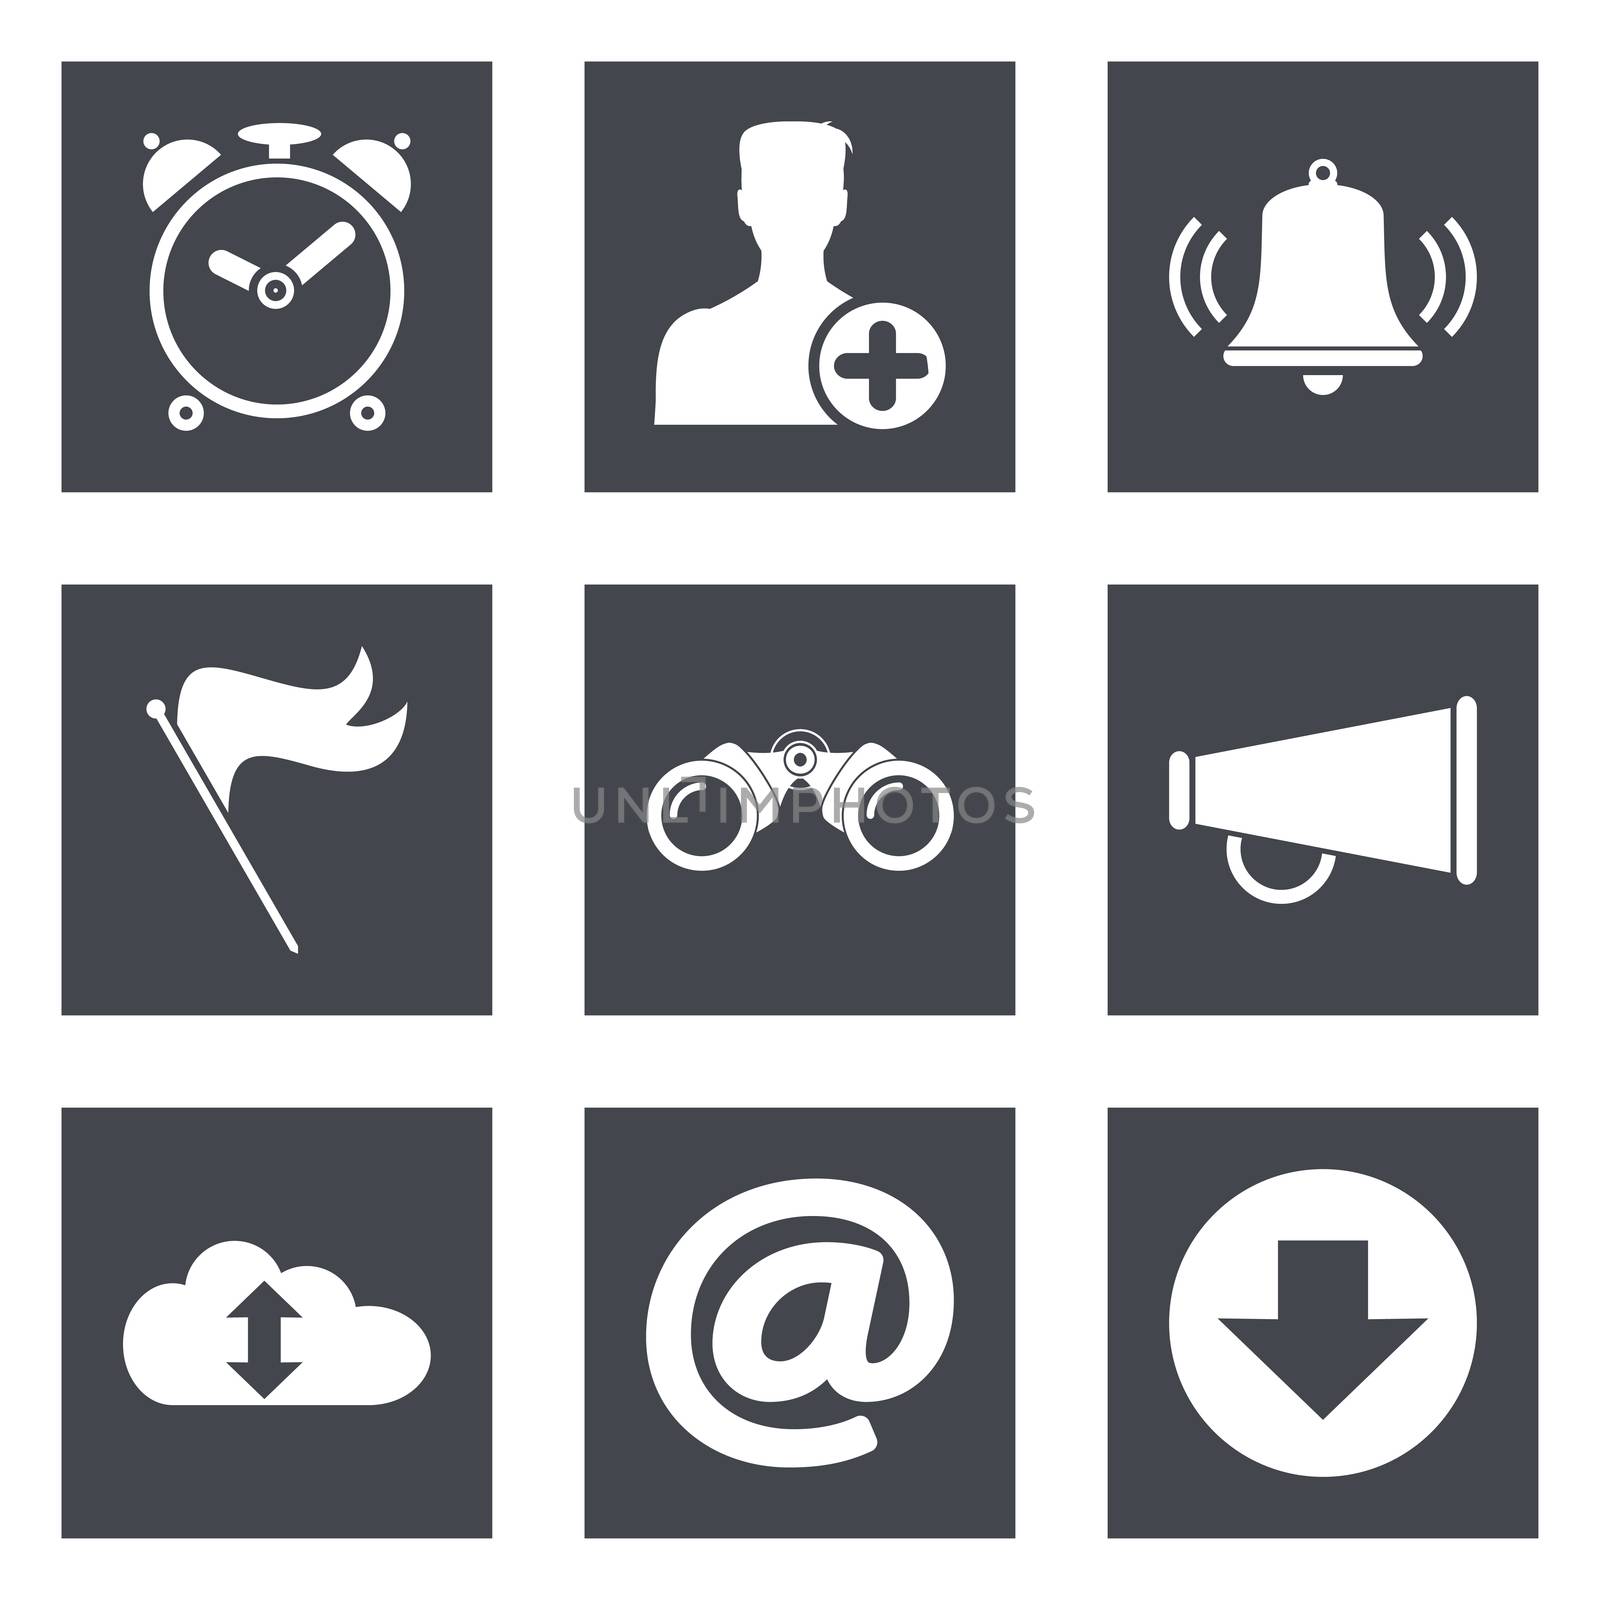 Icons for Web Design and Mobile Applications